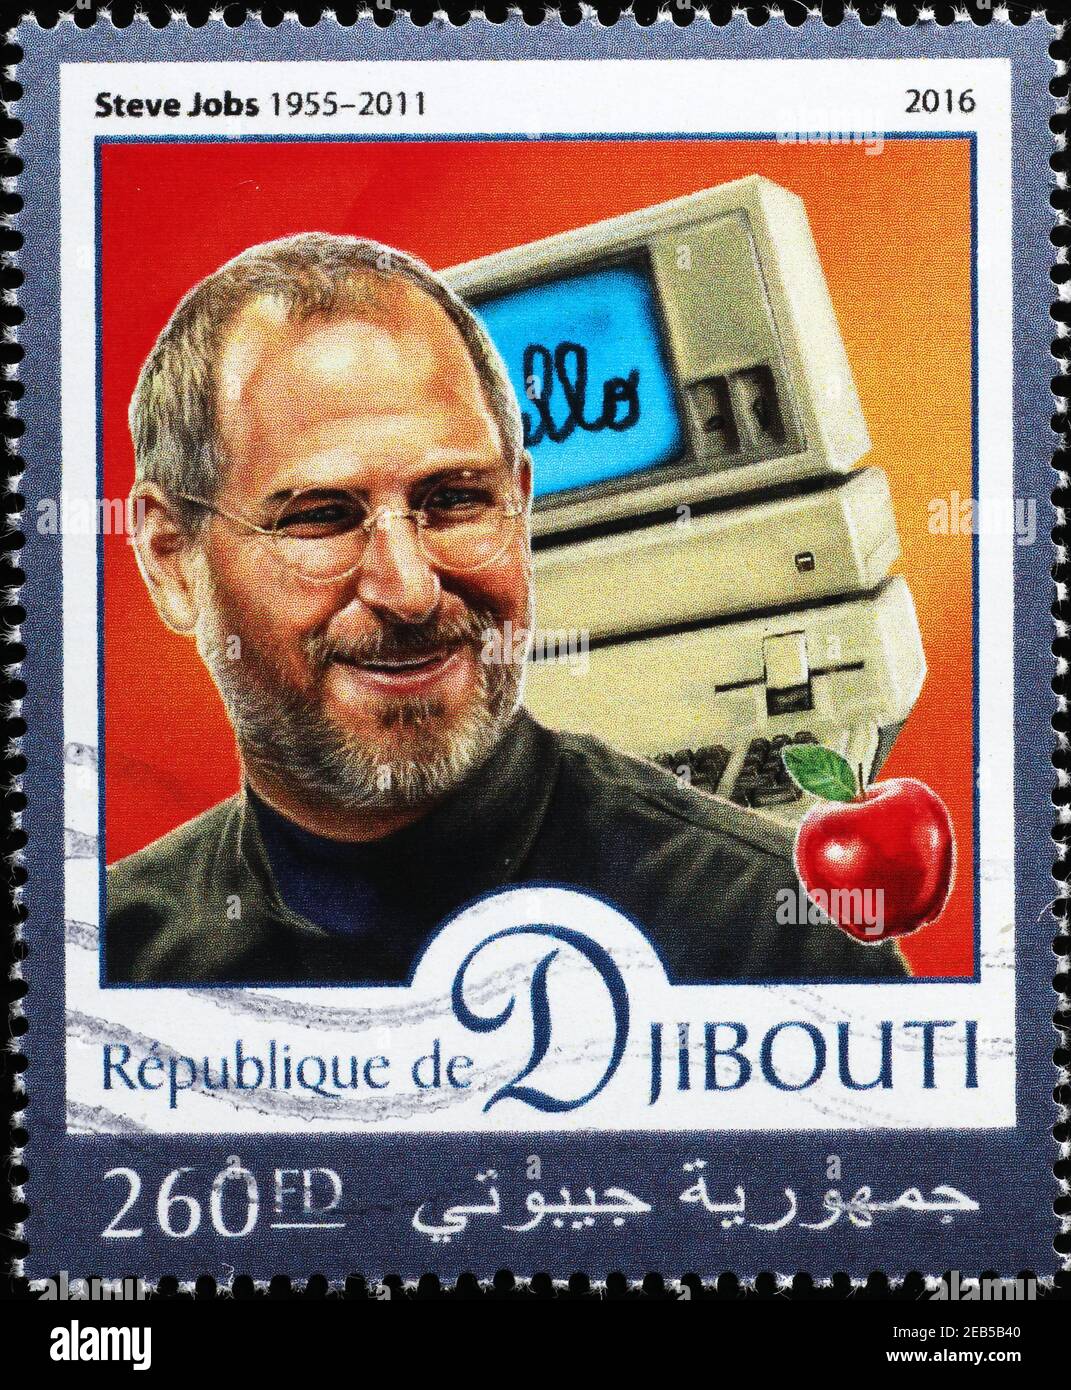 Steve Jobs with a very old Apple Computer on stamp Stock Photo